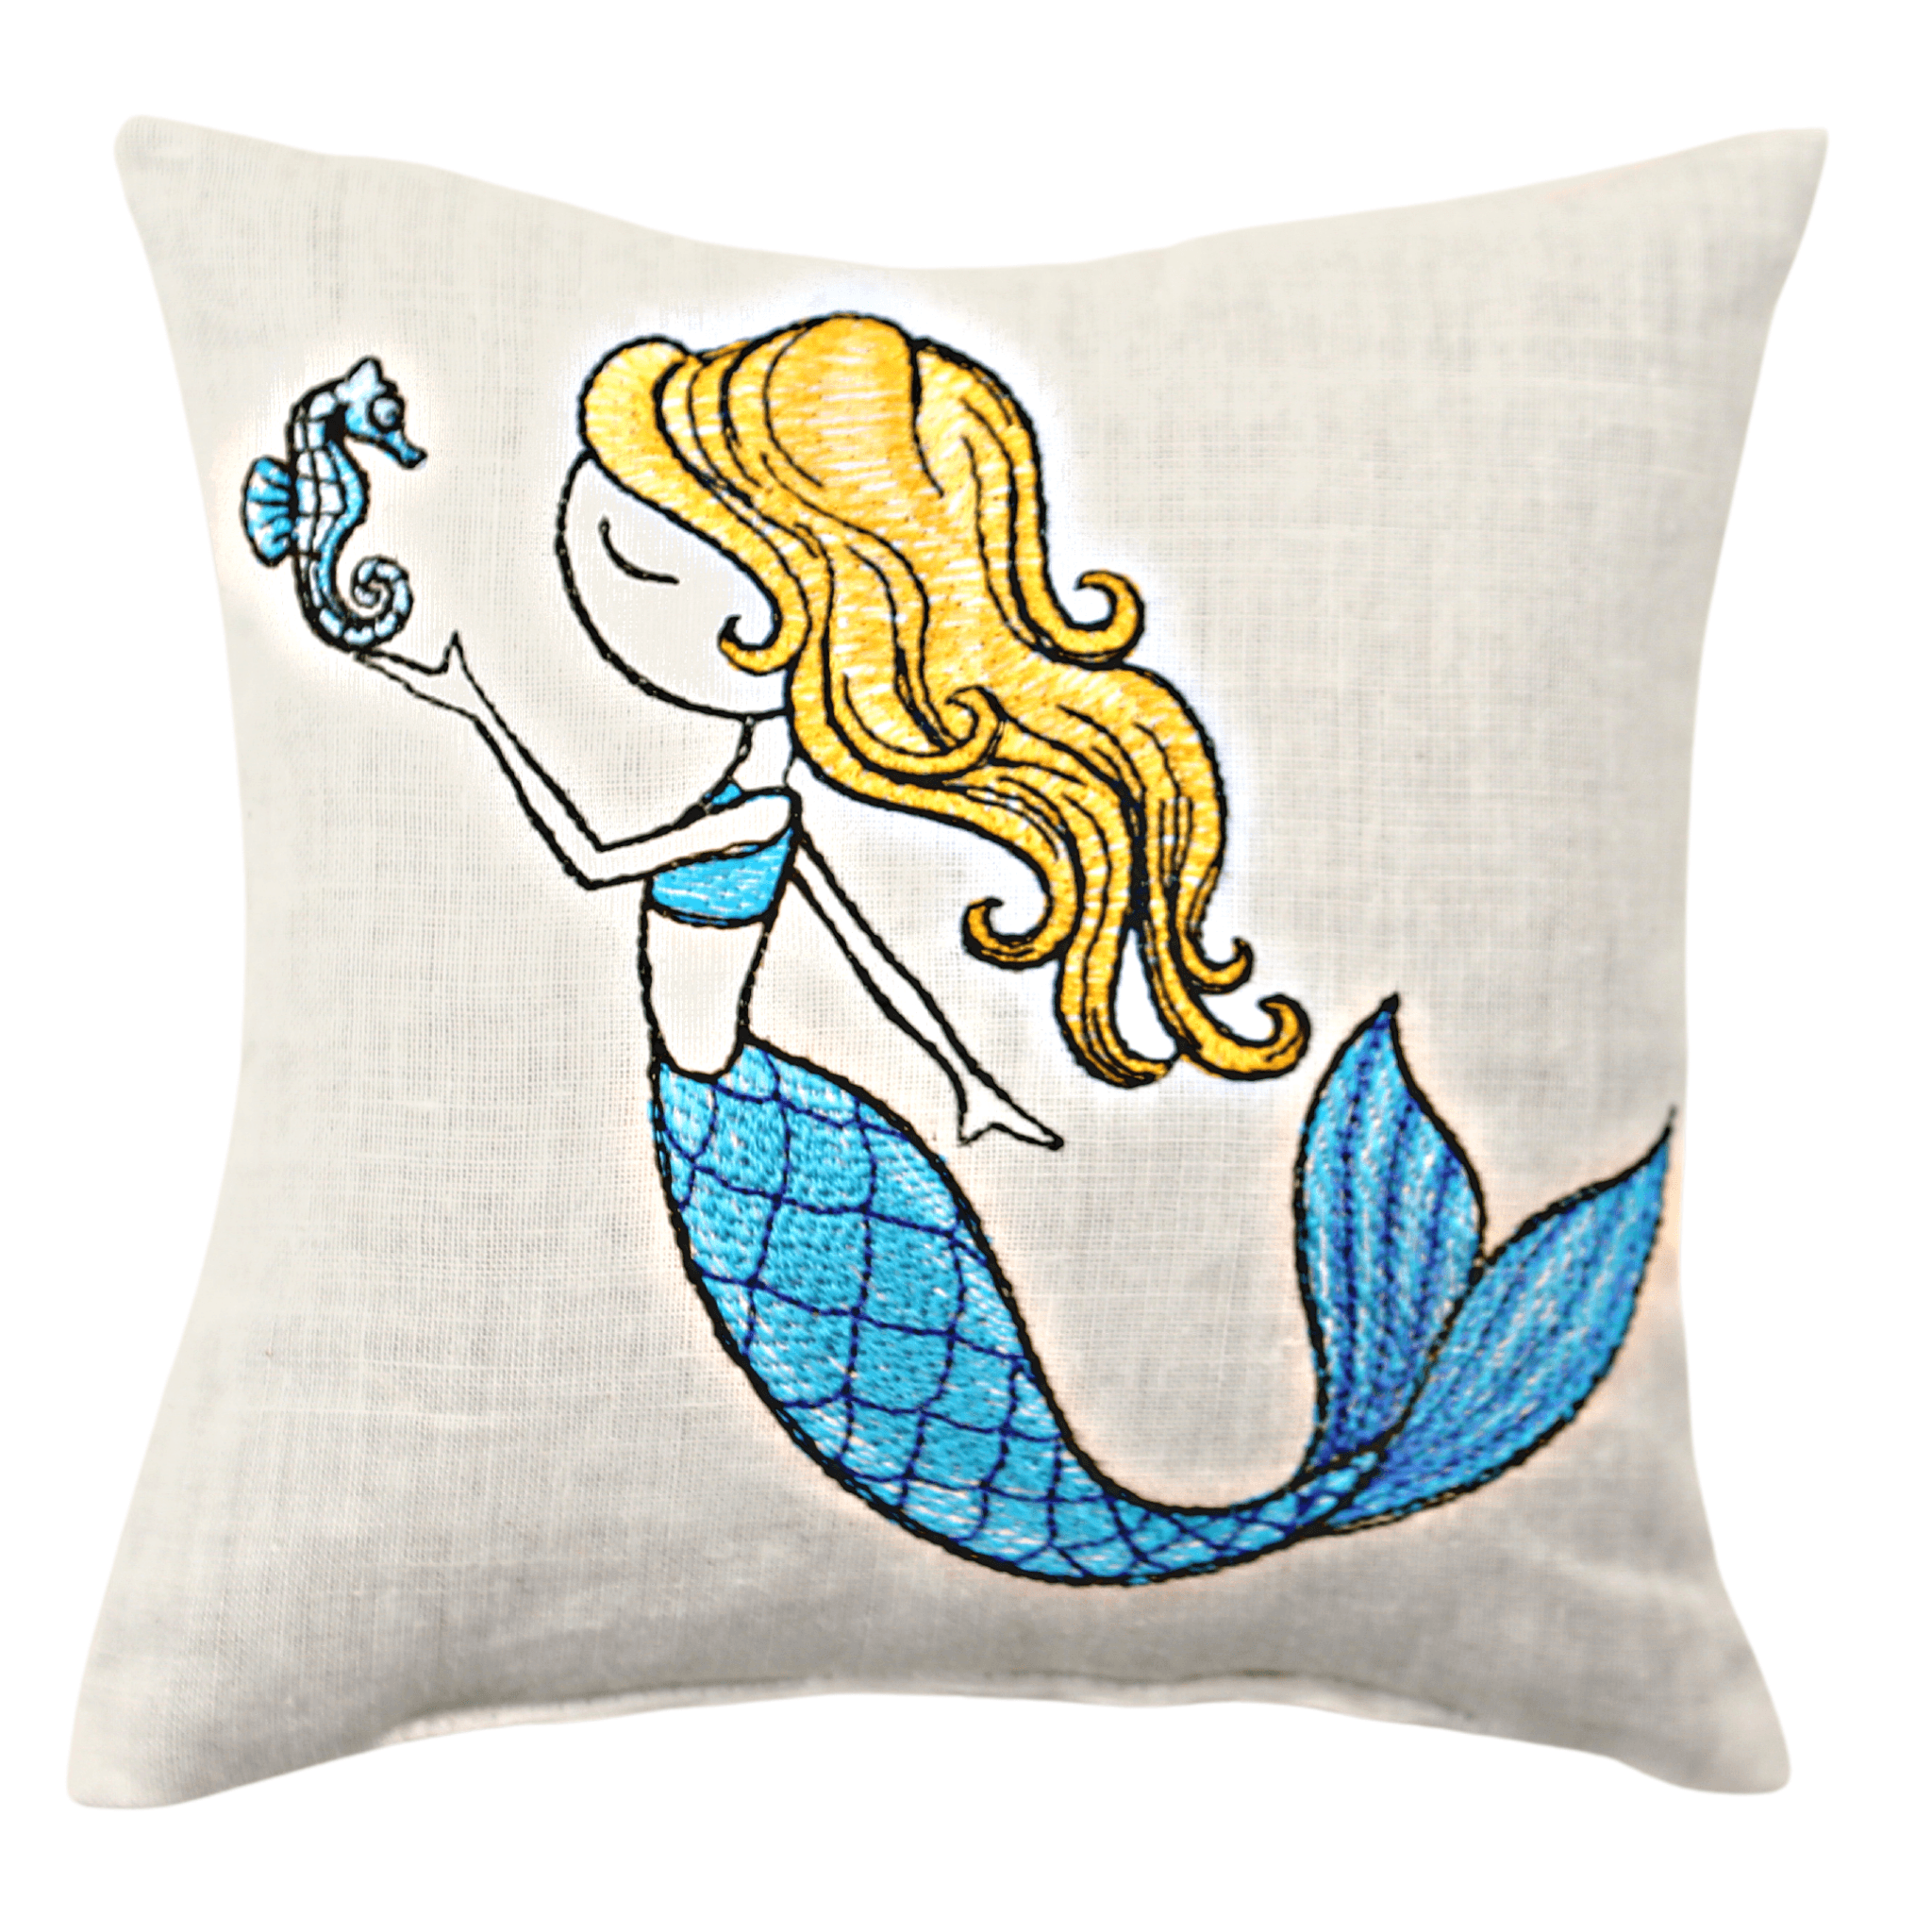 Embroidered Mermaid Lavender Sachet - Lavender By The Bay